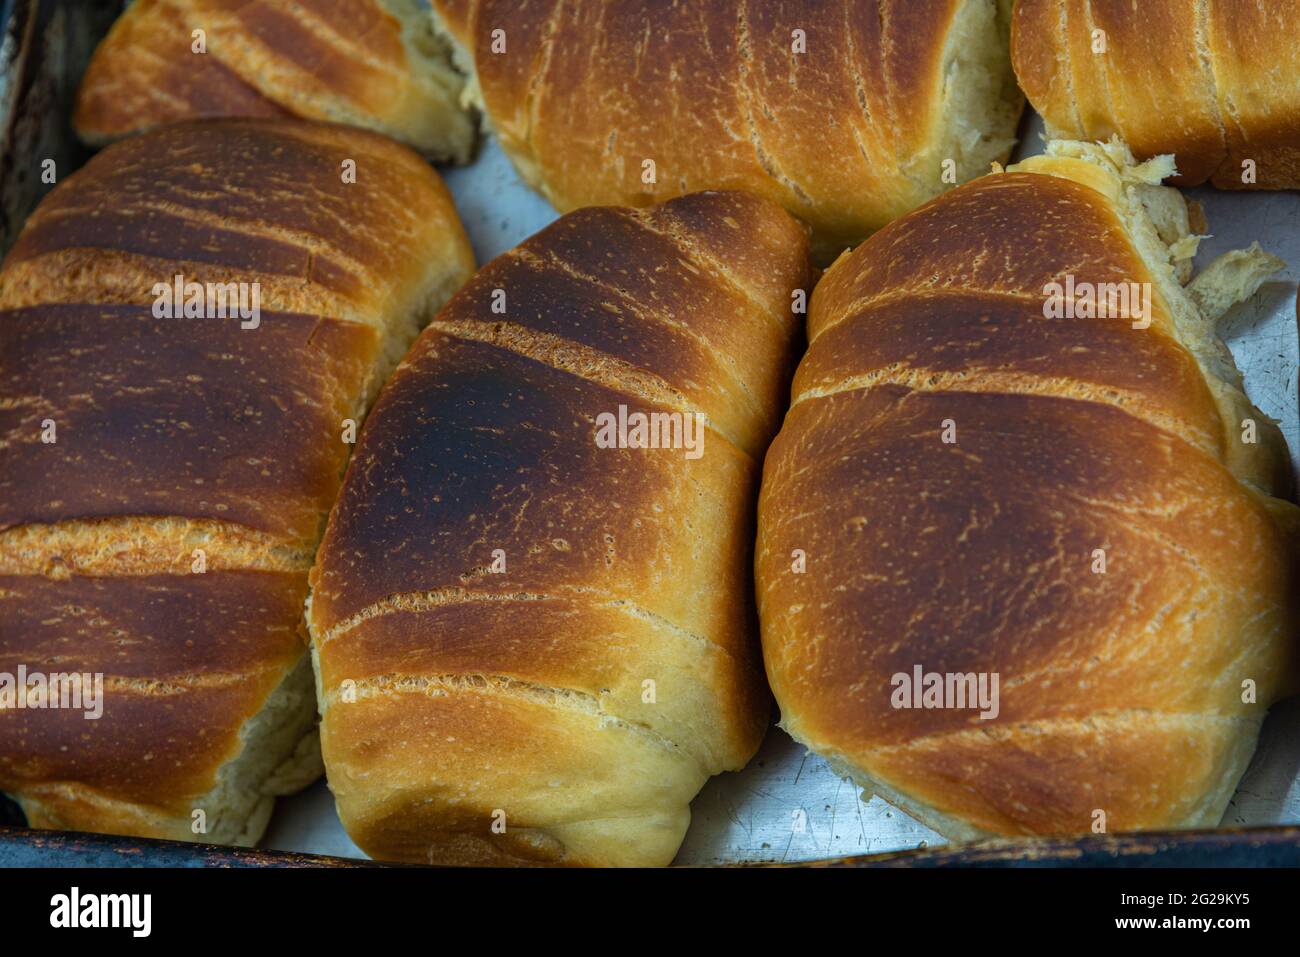 https://c8.alamy.com/comp/2G29KY5/homemade-loaf-made-of-wheat-house-bread-food-for-afternoon-coffee-grandmas-delights-wheat-bread-delicious-cuddly-and-perfect-food-for-the-famil-2G29KY5.jpg